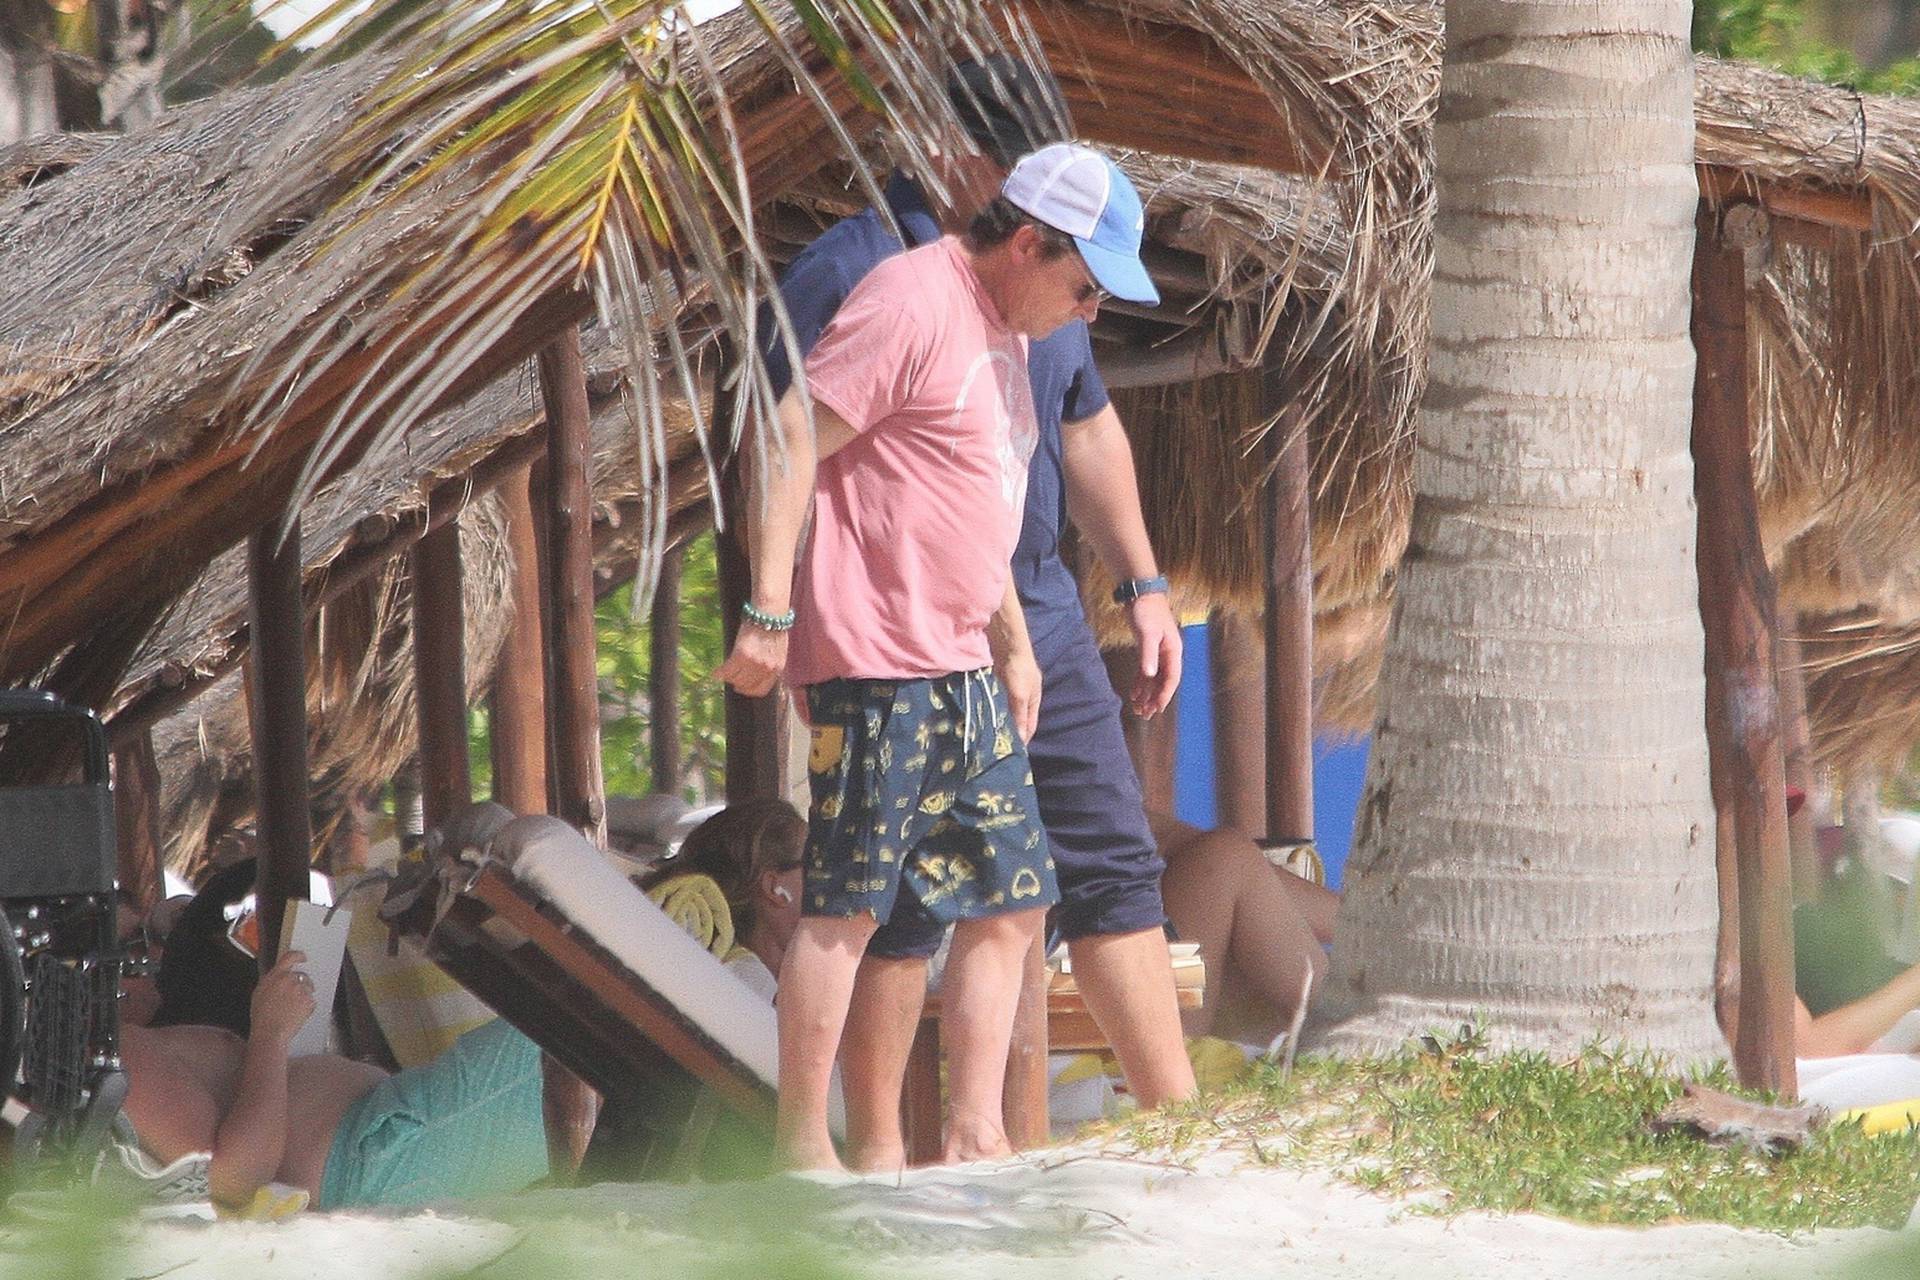 *PREMIUM-EXCLUSIVE* Beloved "Back to the Future" star Michael J. Fox spends New Year in Tulum, Mexico